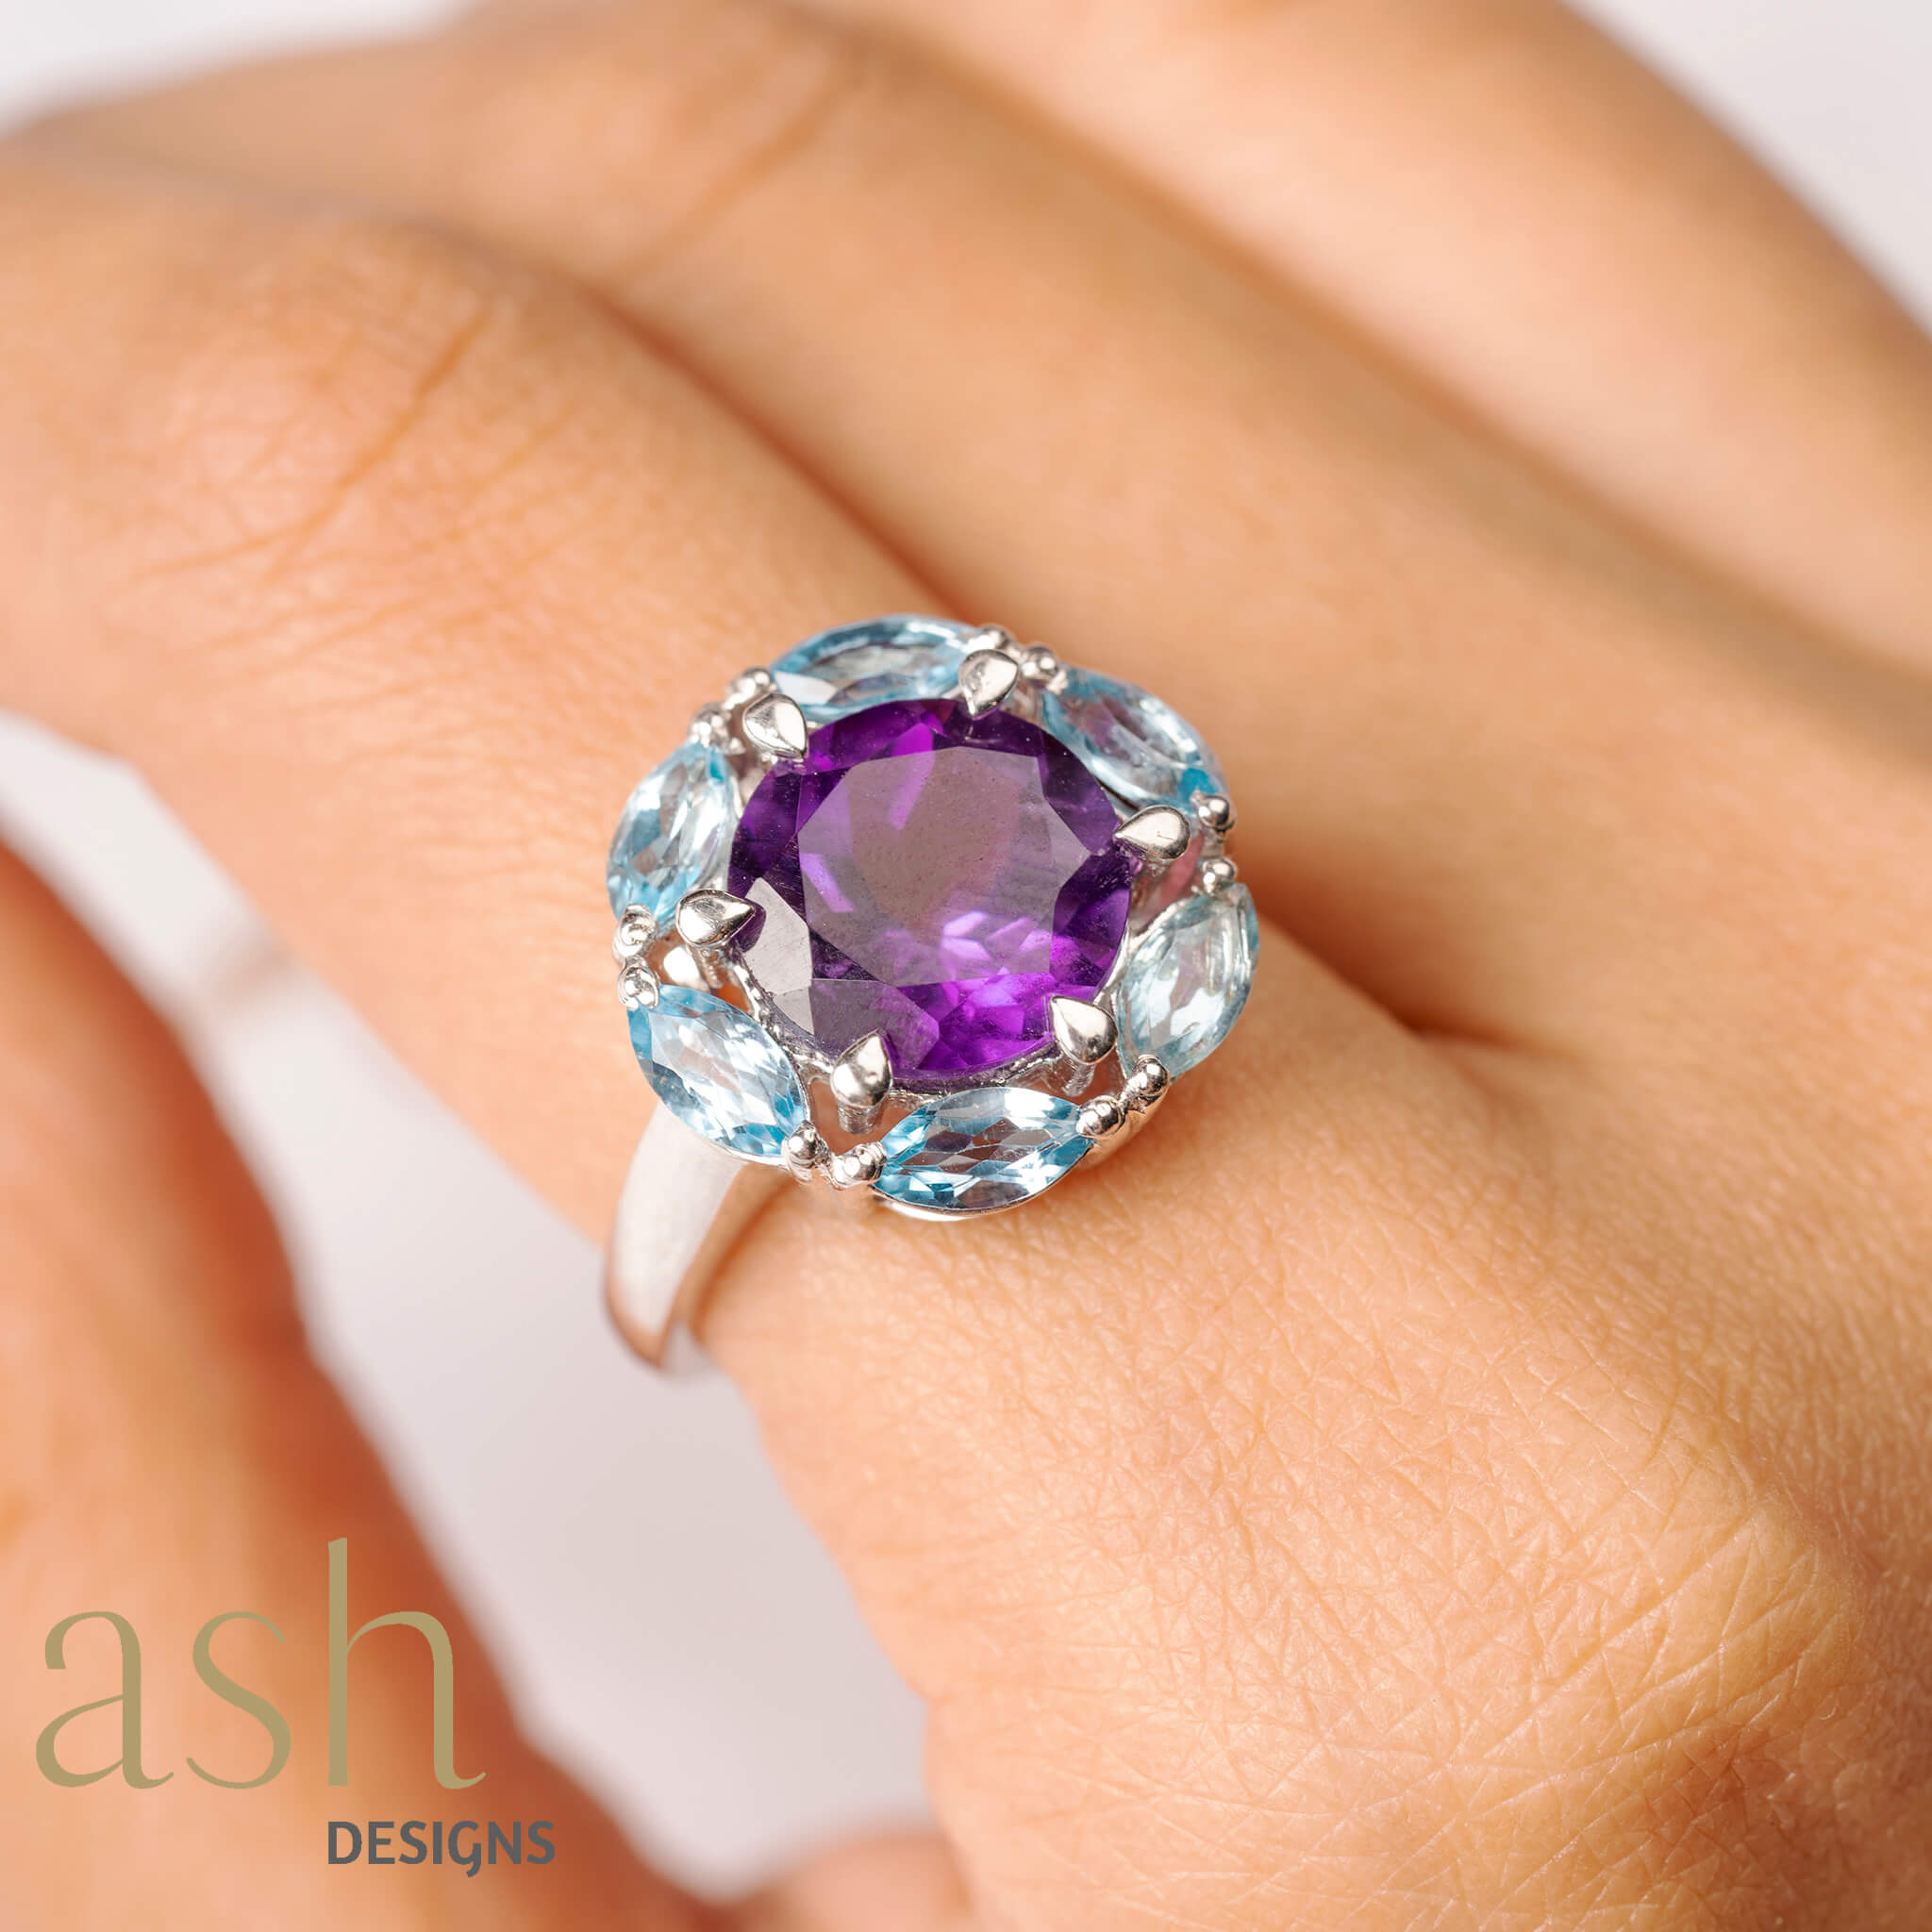 Small Wonder Amethyst and Blue Topaz Ring